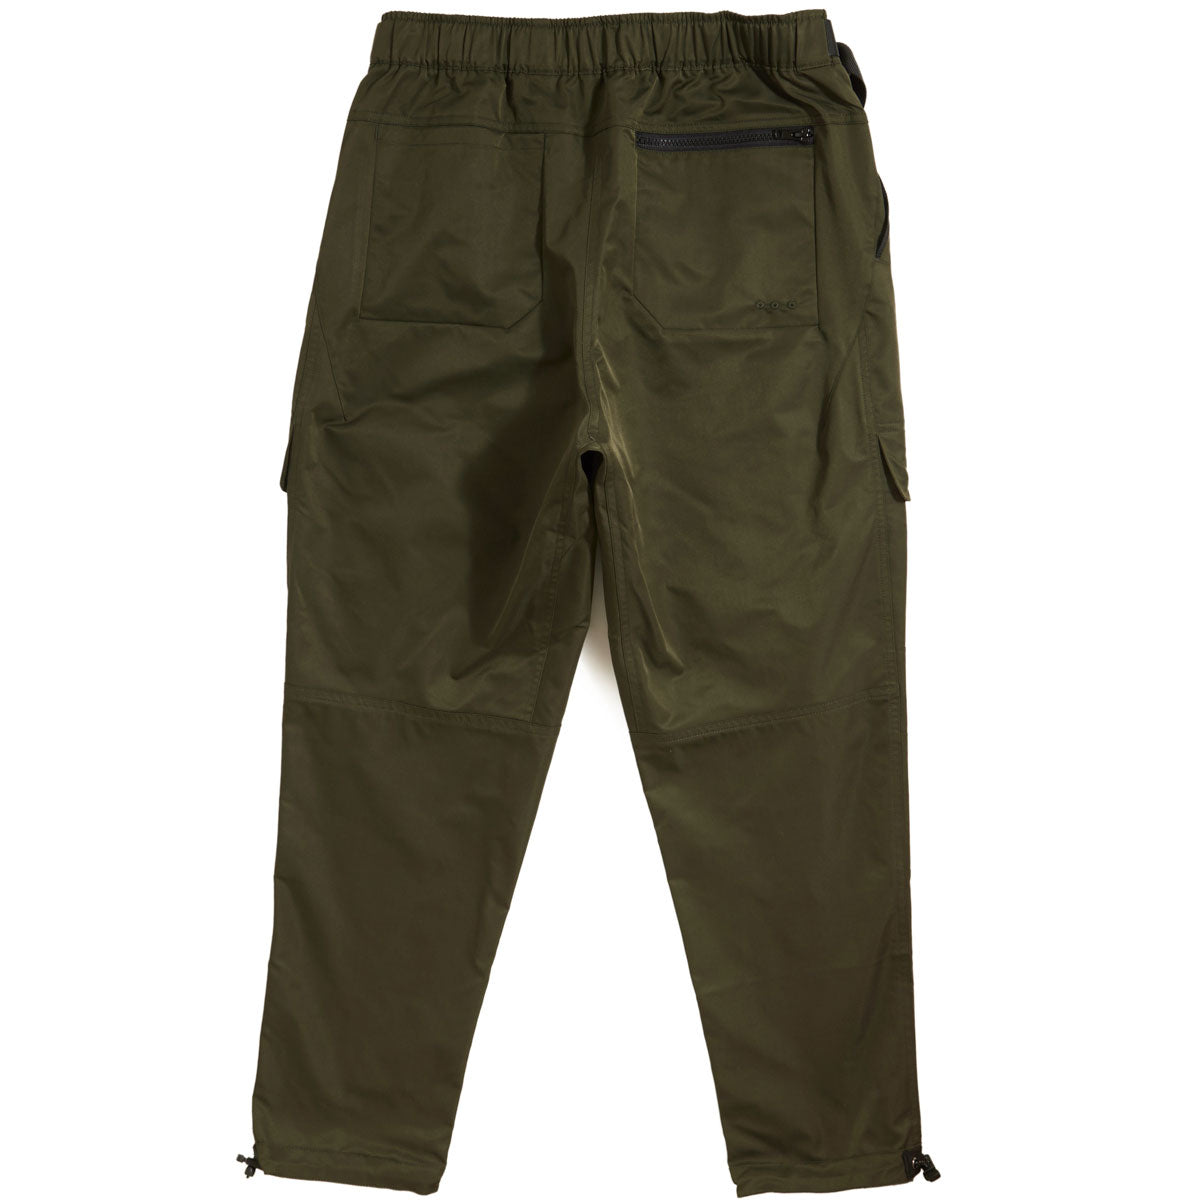 Kennedy The Flight Cargo Pants - Fatigue image 2